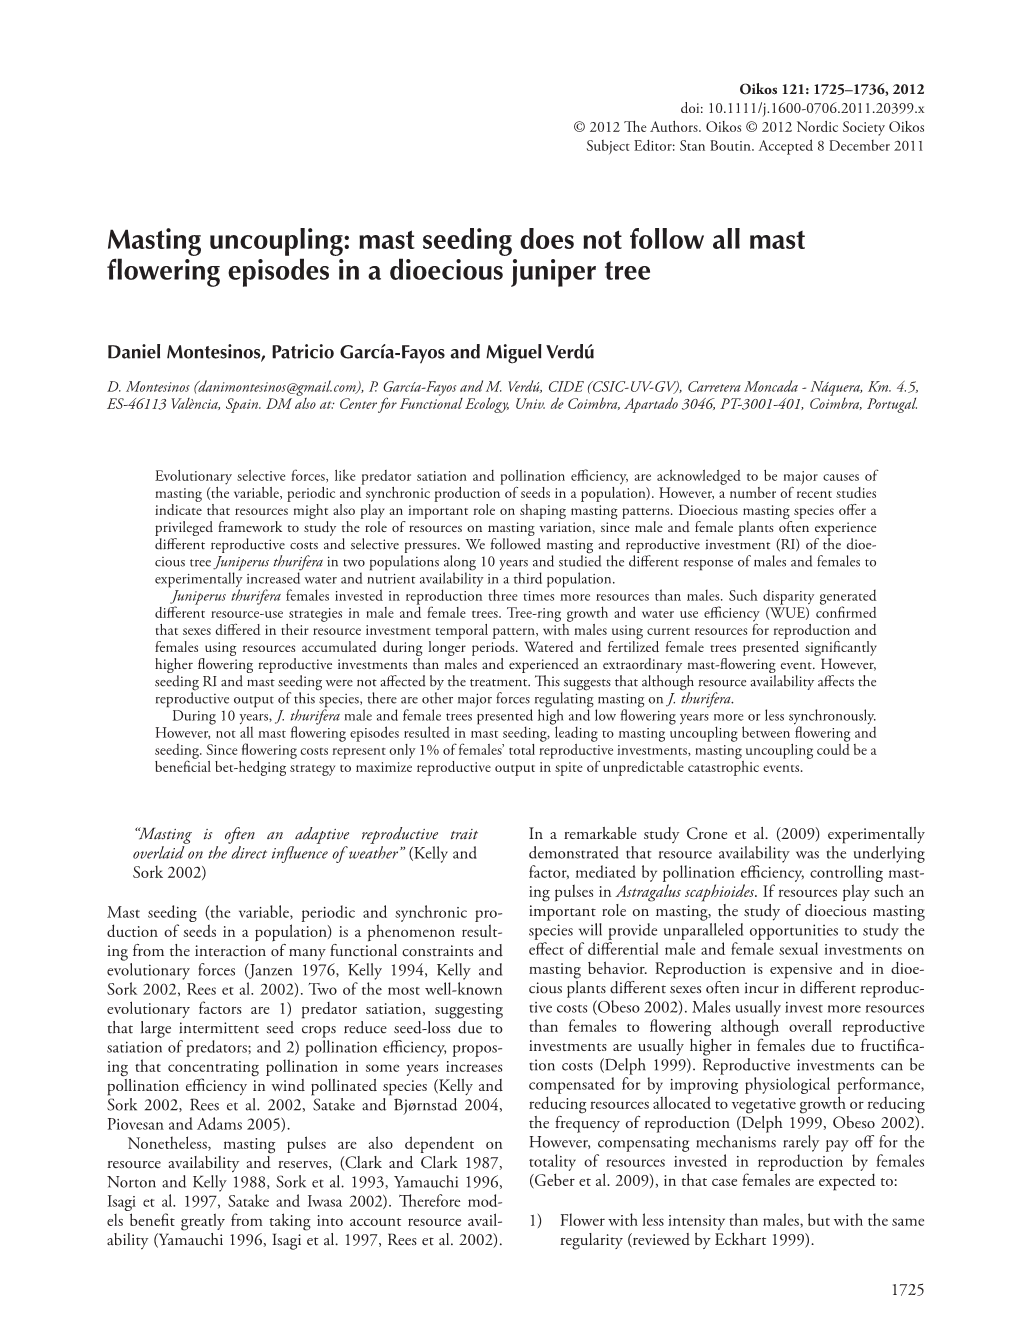 Mast Seeding Does Not Follow All Mast Flowering Episodes in a Dioecious